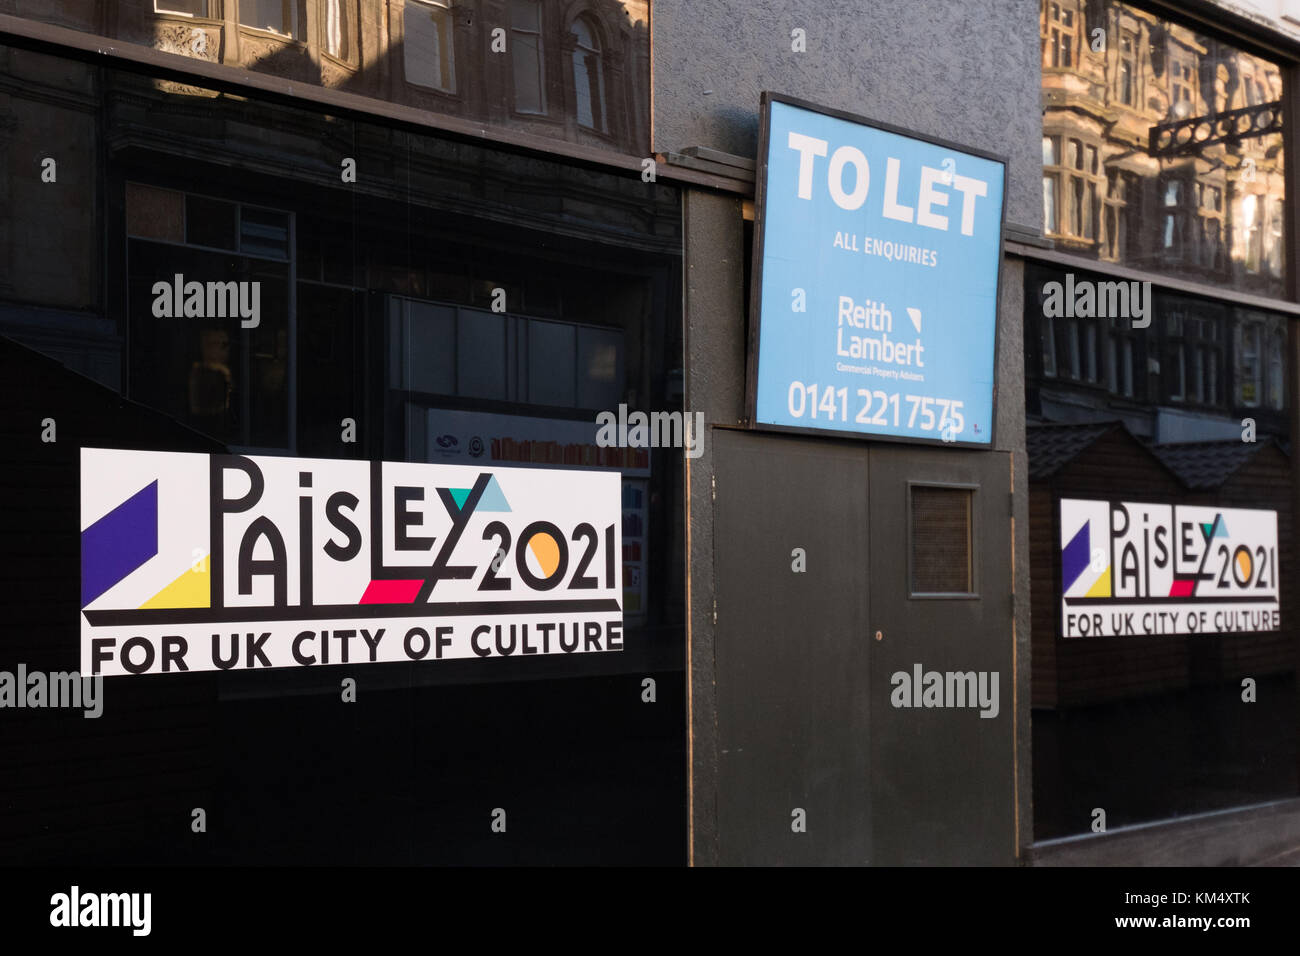 Paisley for UK City of Culture 2021 sign, next to To Let sign - Paisley, Scotland, UK Stock Photo